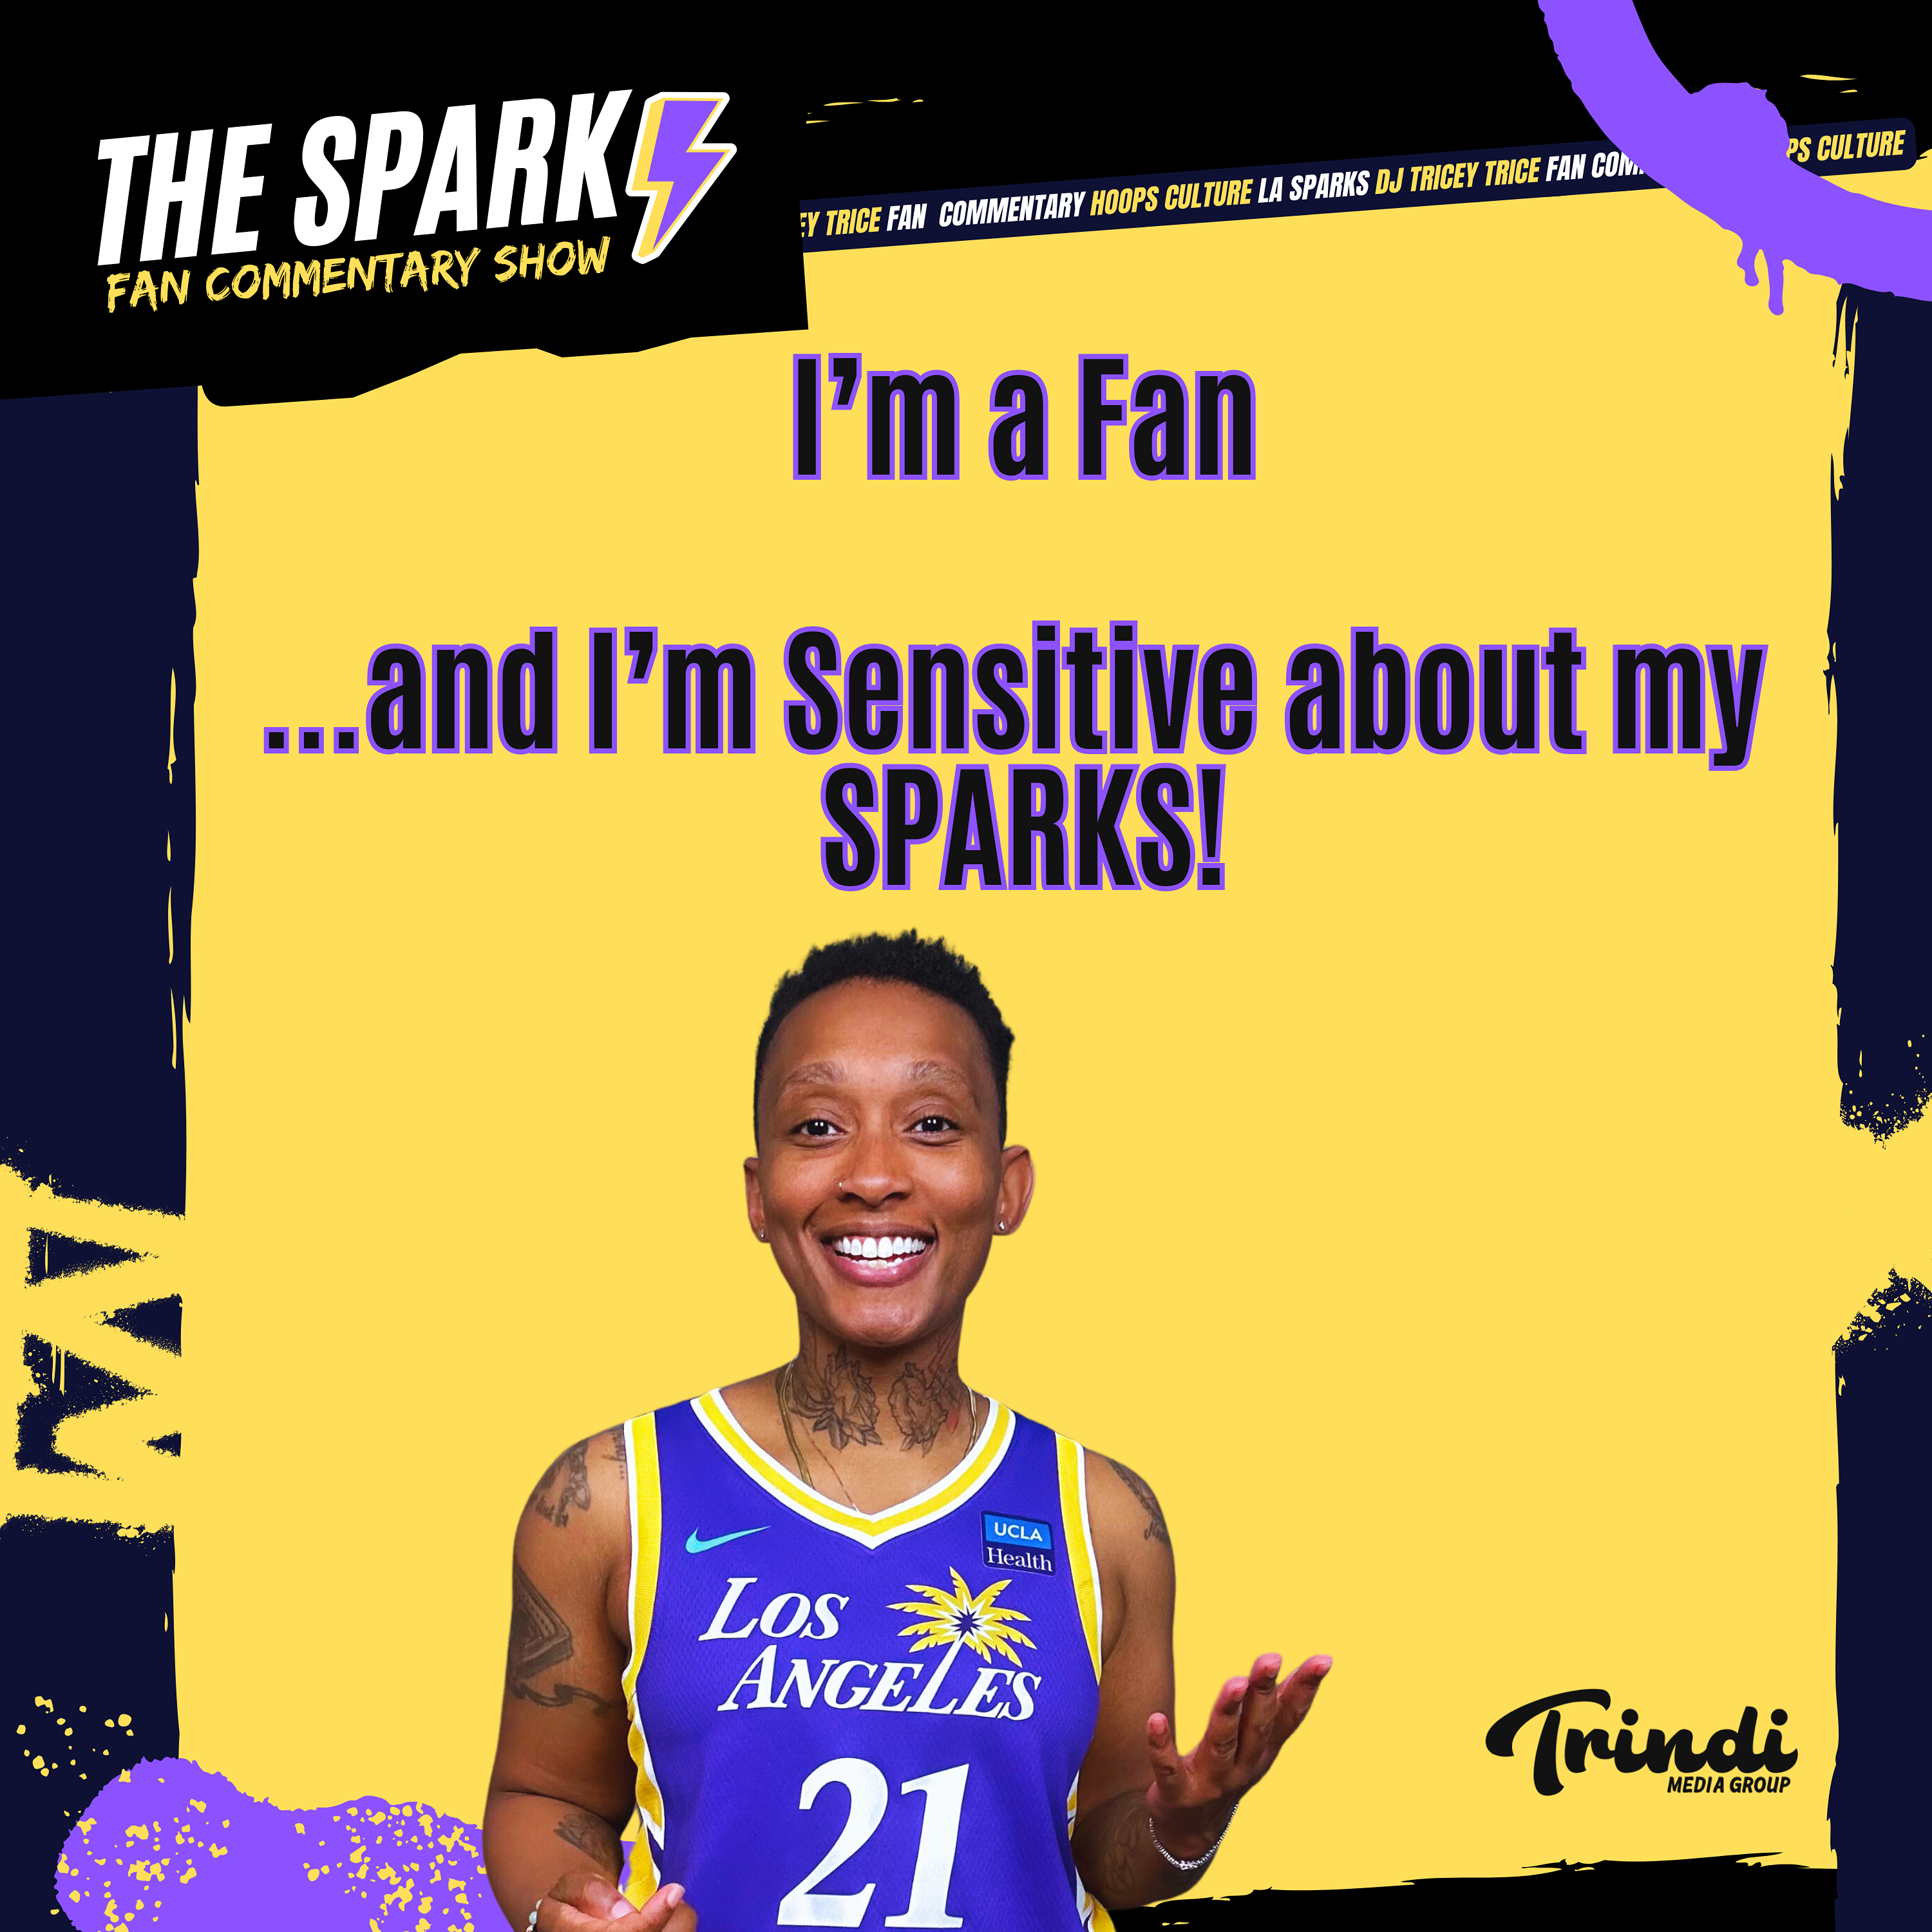 The Spark: A Fan Commentary Podcast